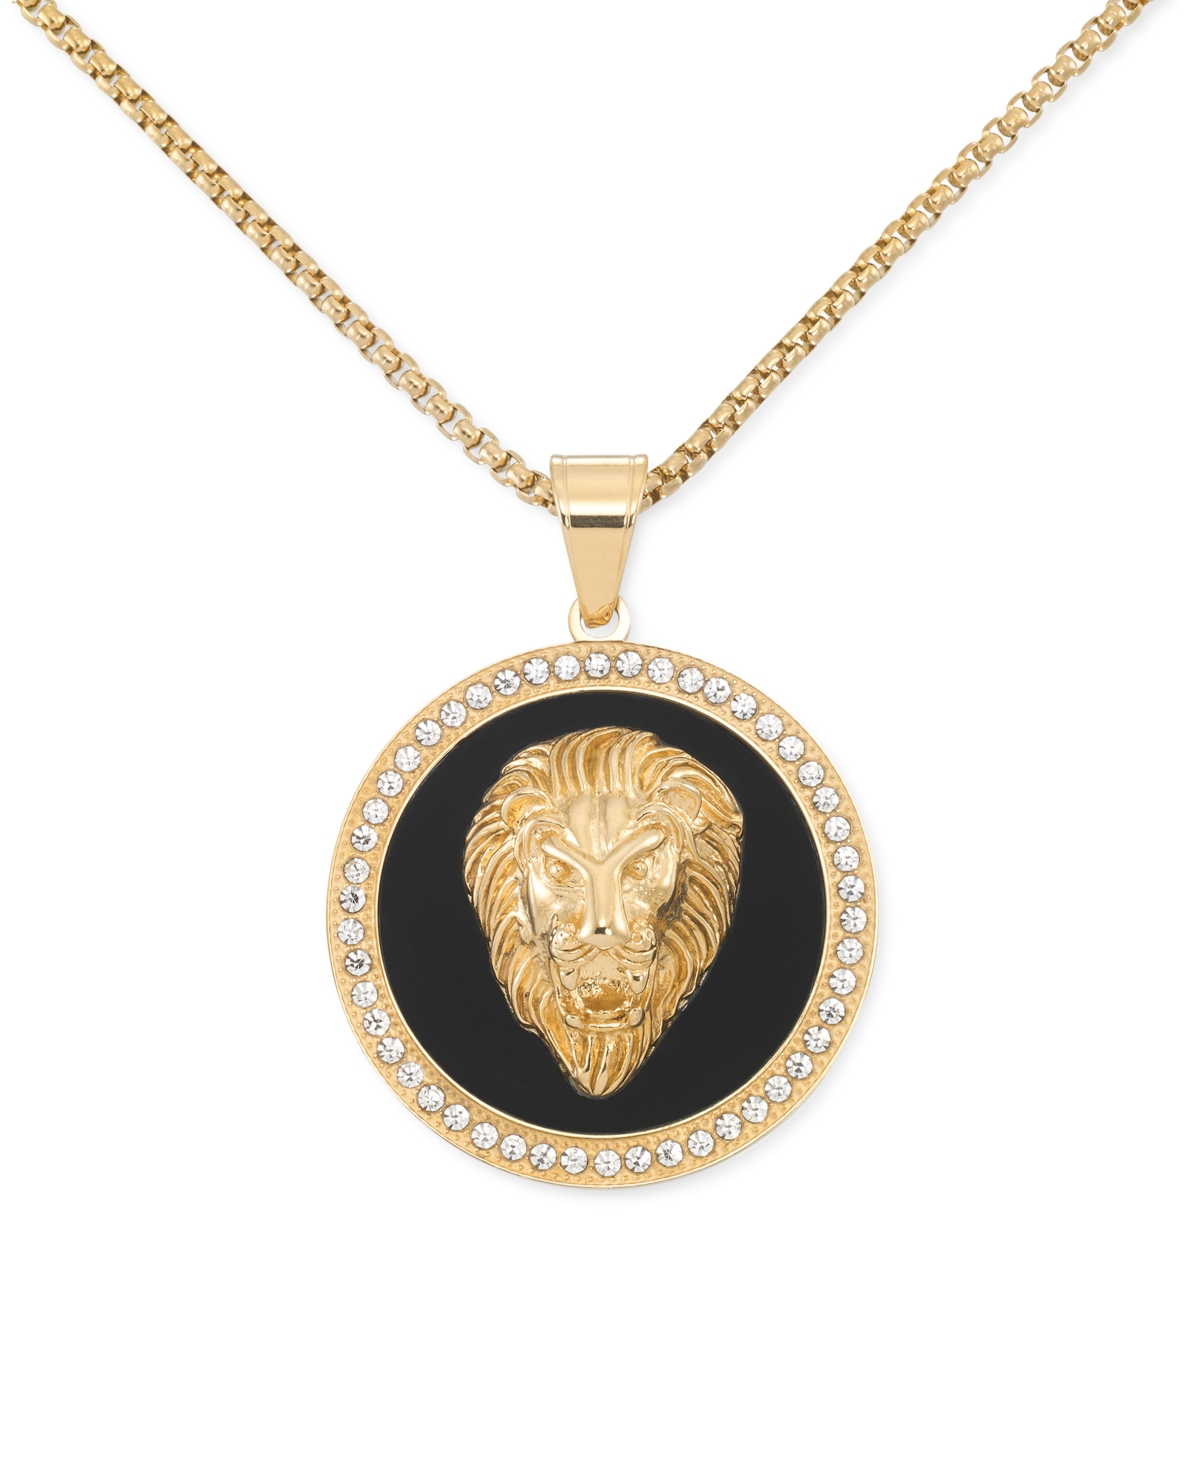 Smith Black Agate & Lion Head 24" Pendant Necklace in Gold-Tone Ion-Plated Stainless Steel - Gold-Tone